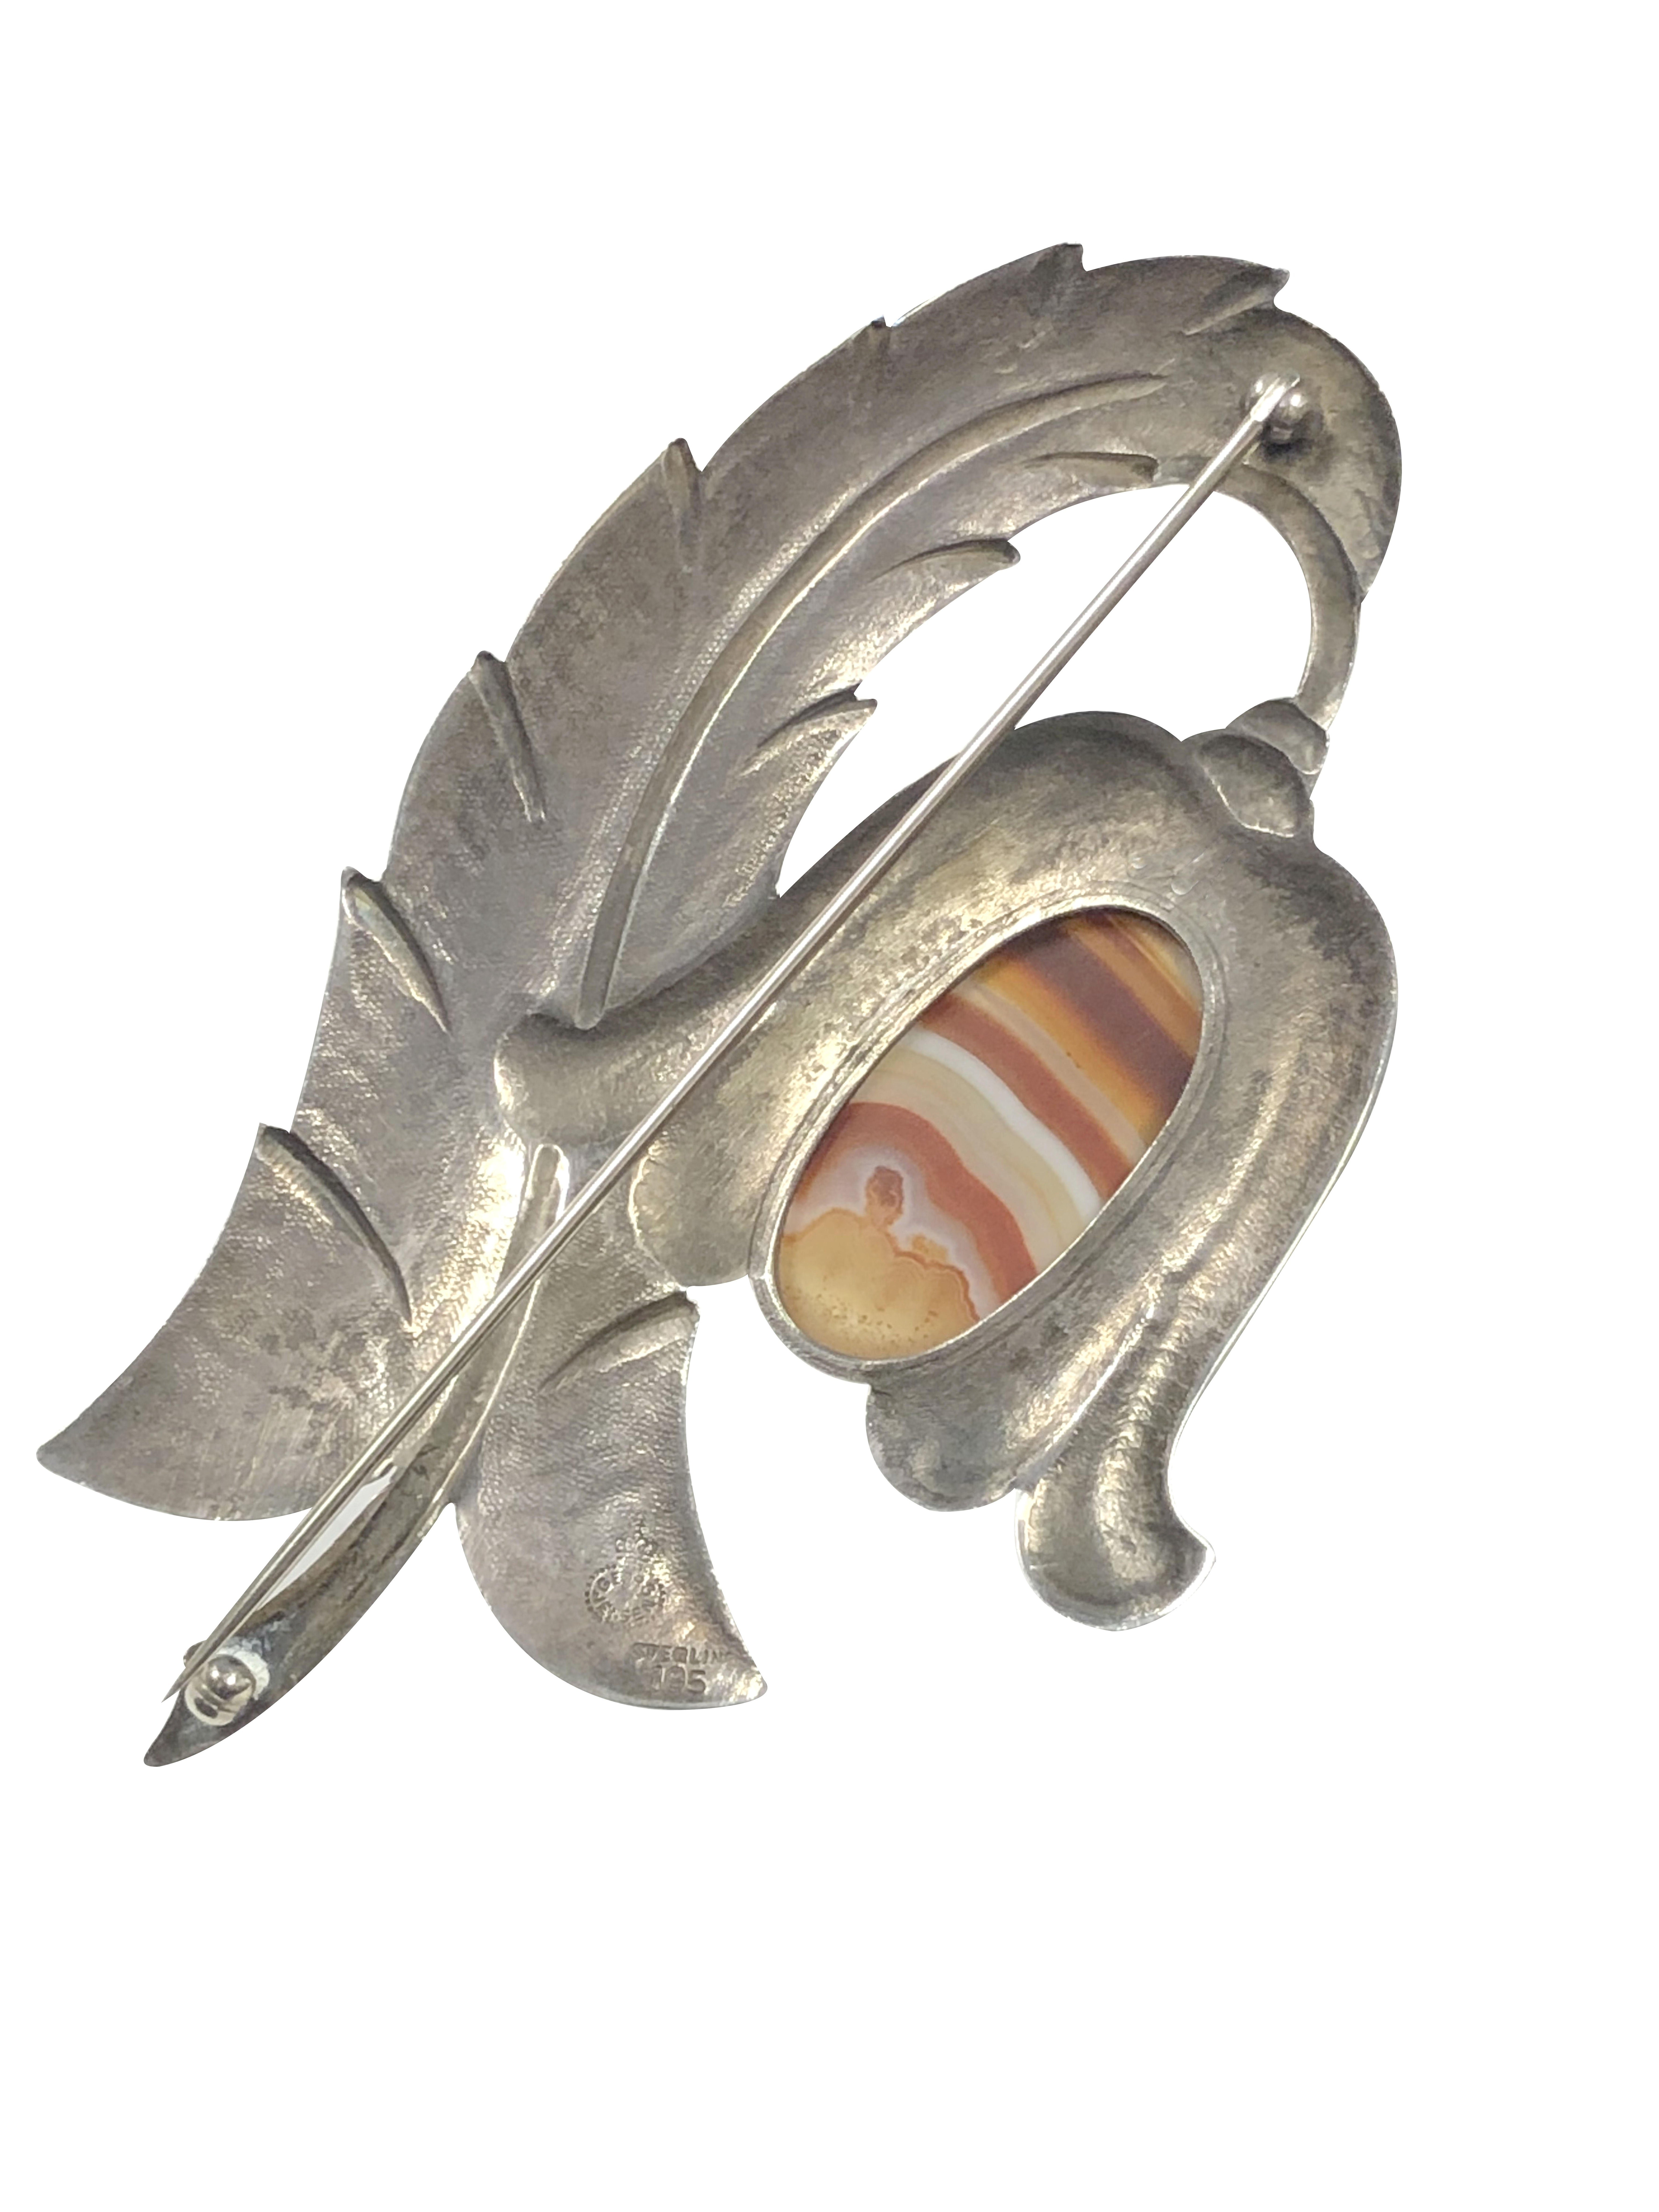 Circa 1920 - 1930 Georg Jensen Denmark Brooch, hand hammered sterling silver and set with an Agate in the form of a Tulip and leaf, measuring 4 inches in length X 2 1/2 inches wide.  A fine and scarce early example of Jensen workmanship.